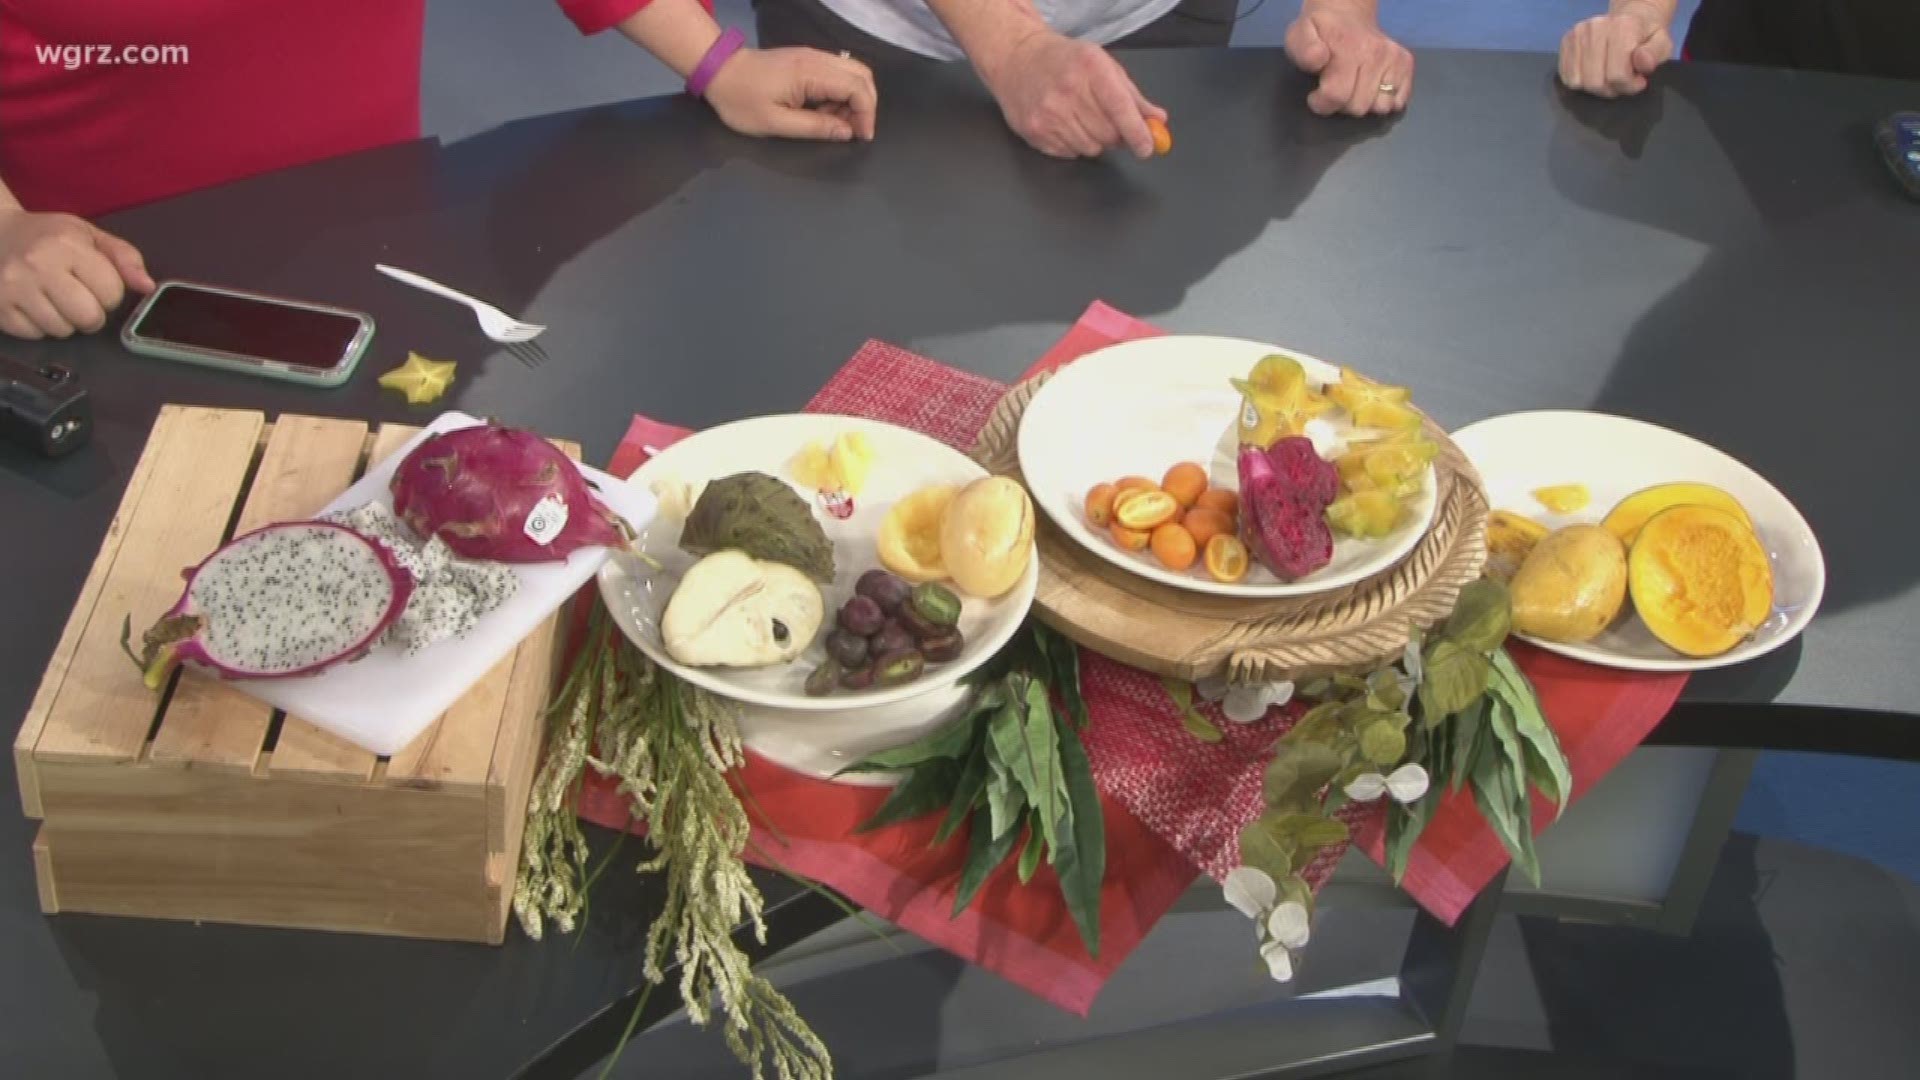 Chef Binks showcases all those exotic fruits you've always wanted to try.